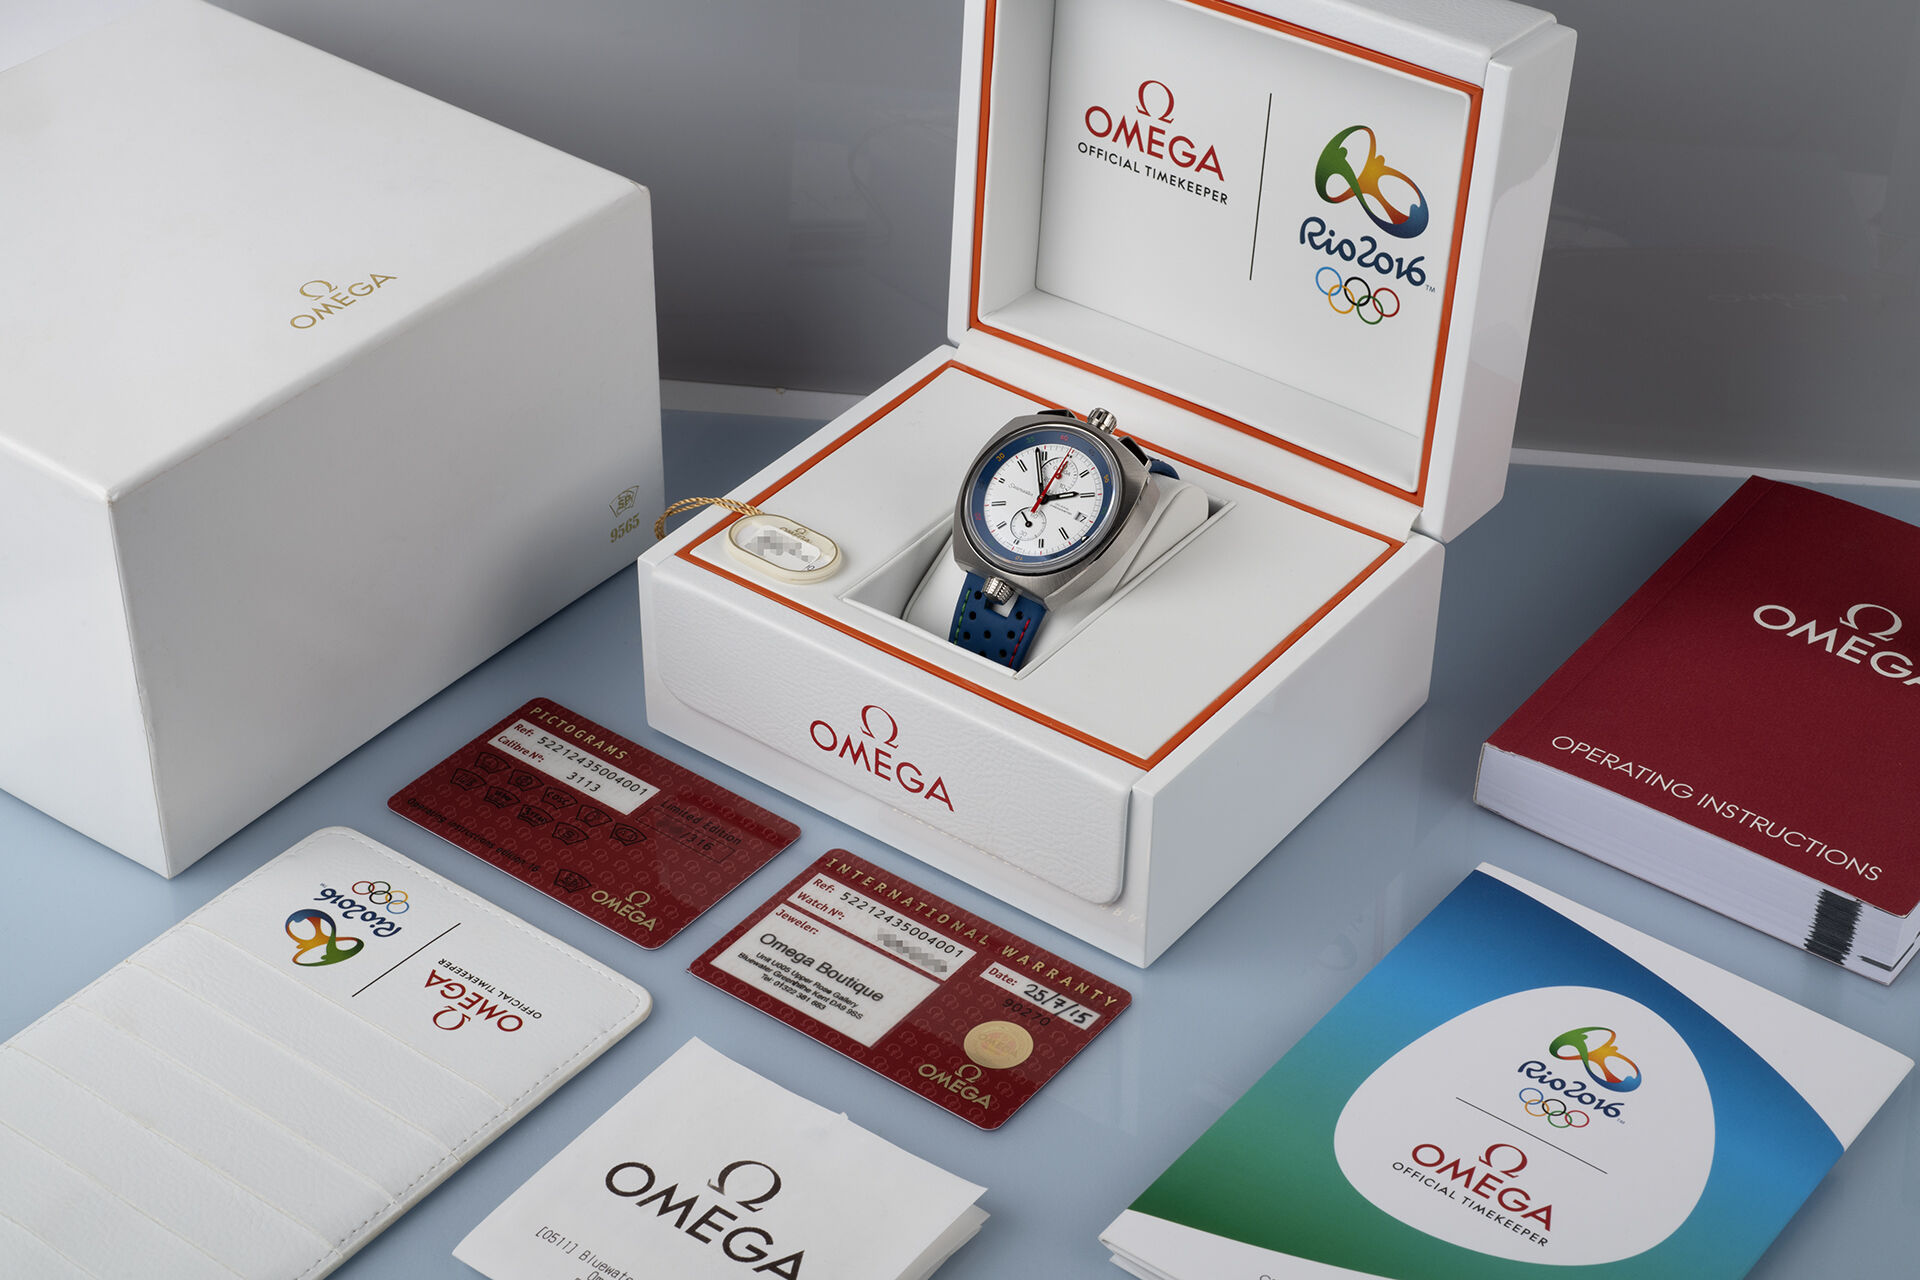 ref 52212435004001 | Limited Edition '316 Pieces made' | Omega Seamaster